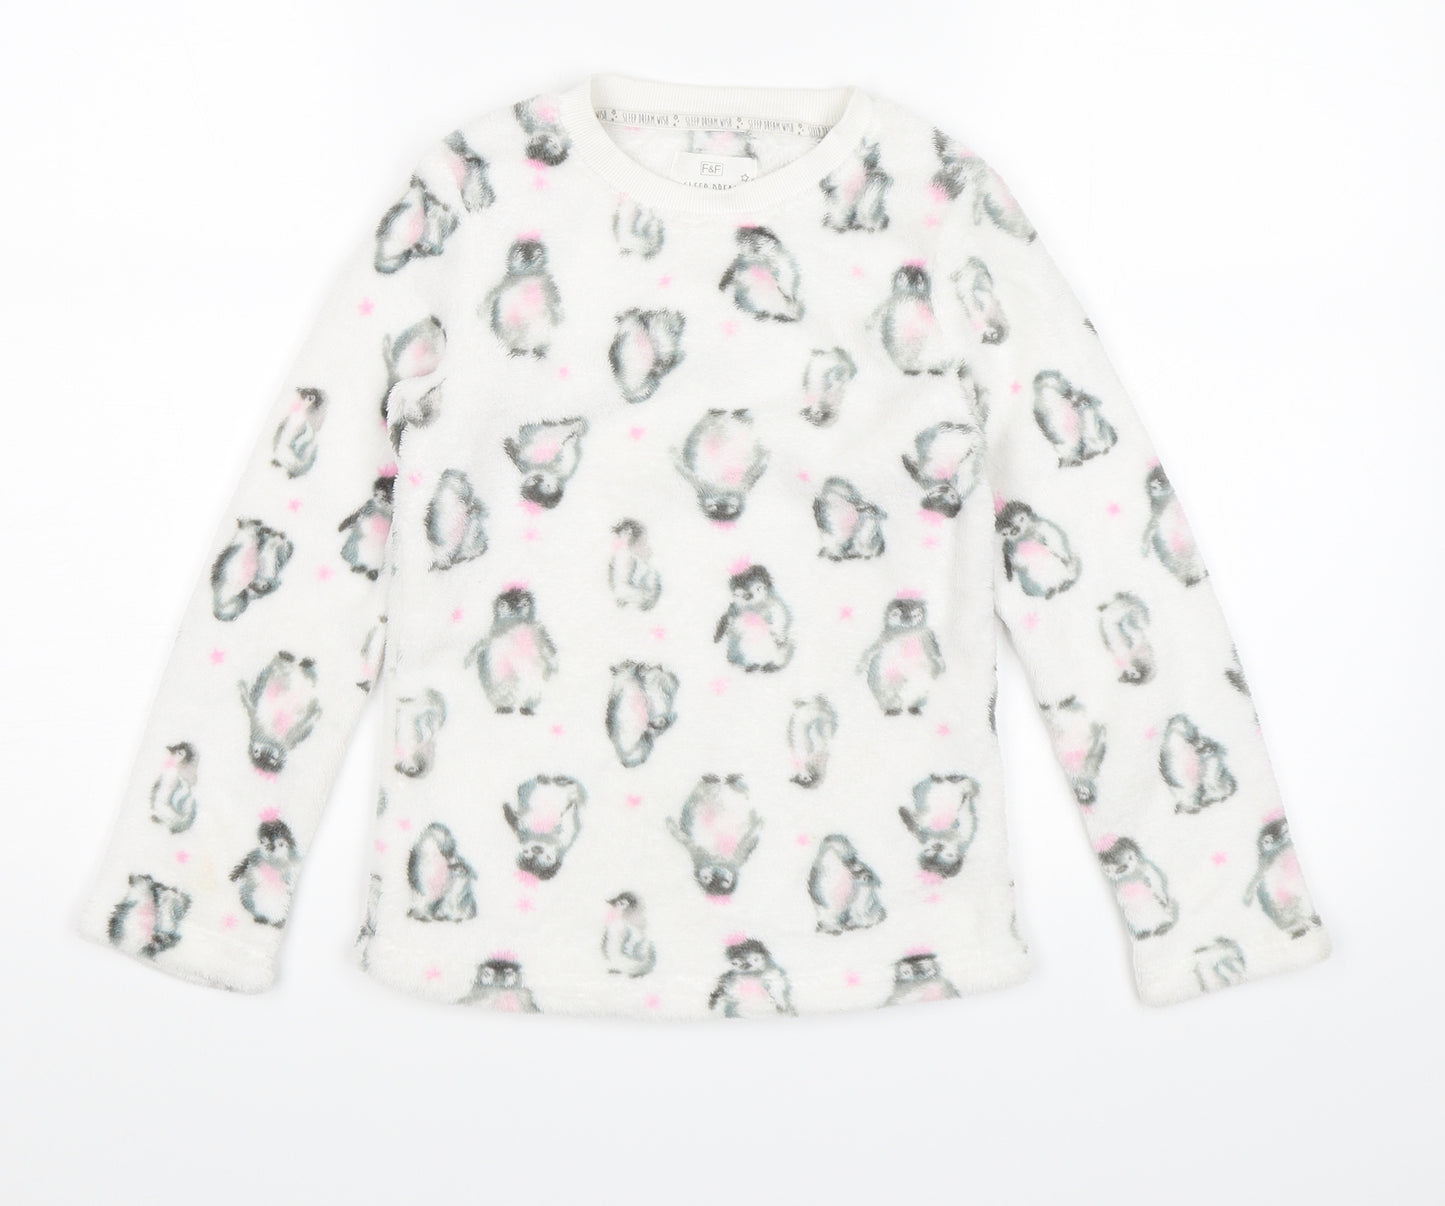 F&F Girls White Solid  Top Pyjama Top Size 8-9 Years  - Penguins